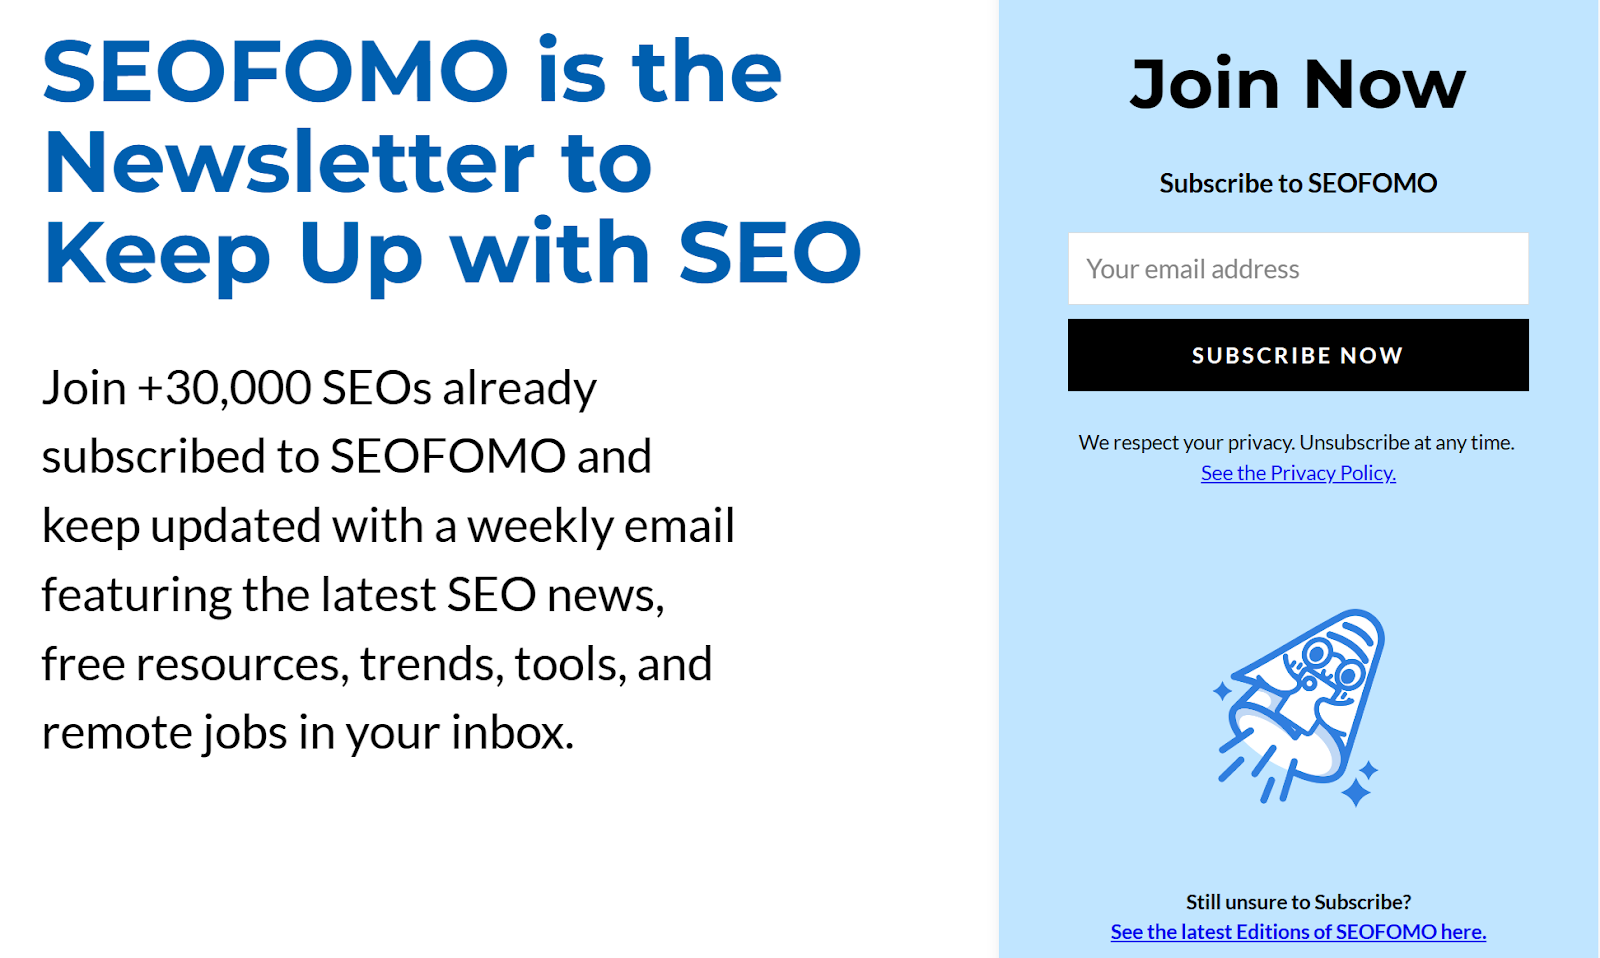 The SEOFOMO Newsletter by Aleyda Solis (Home page)